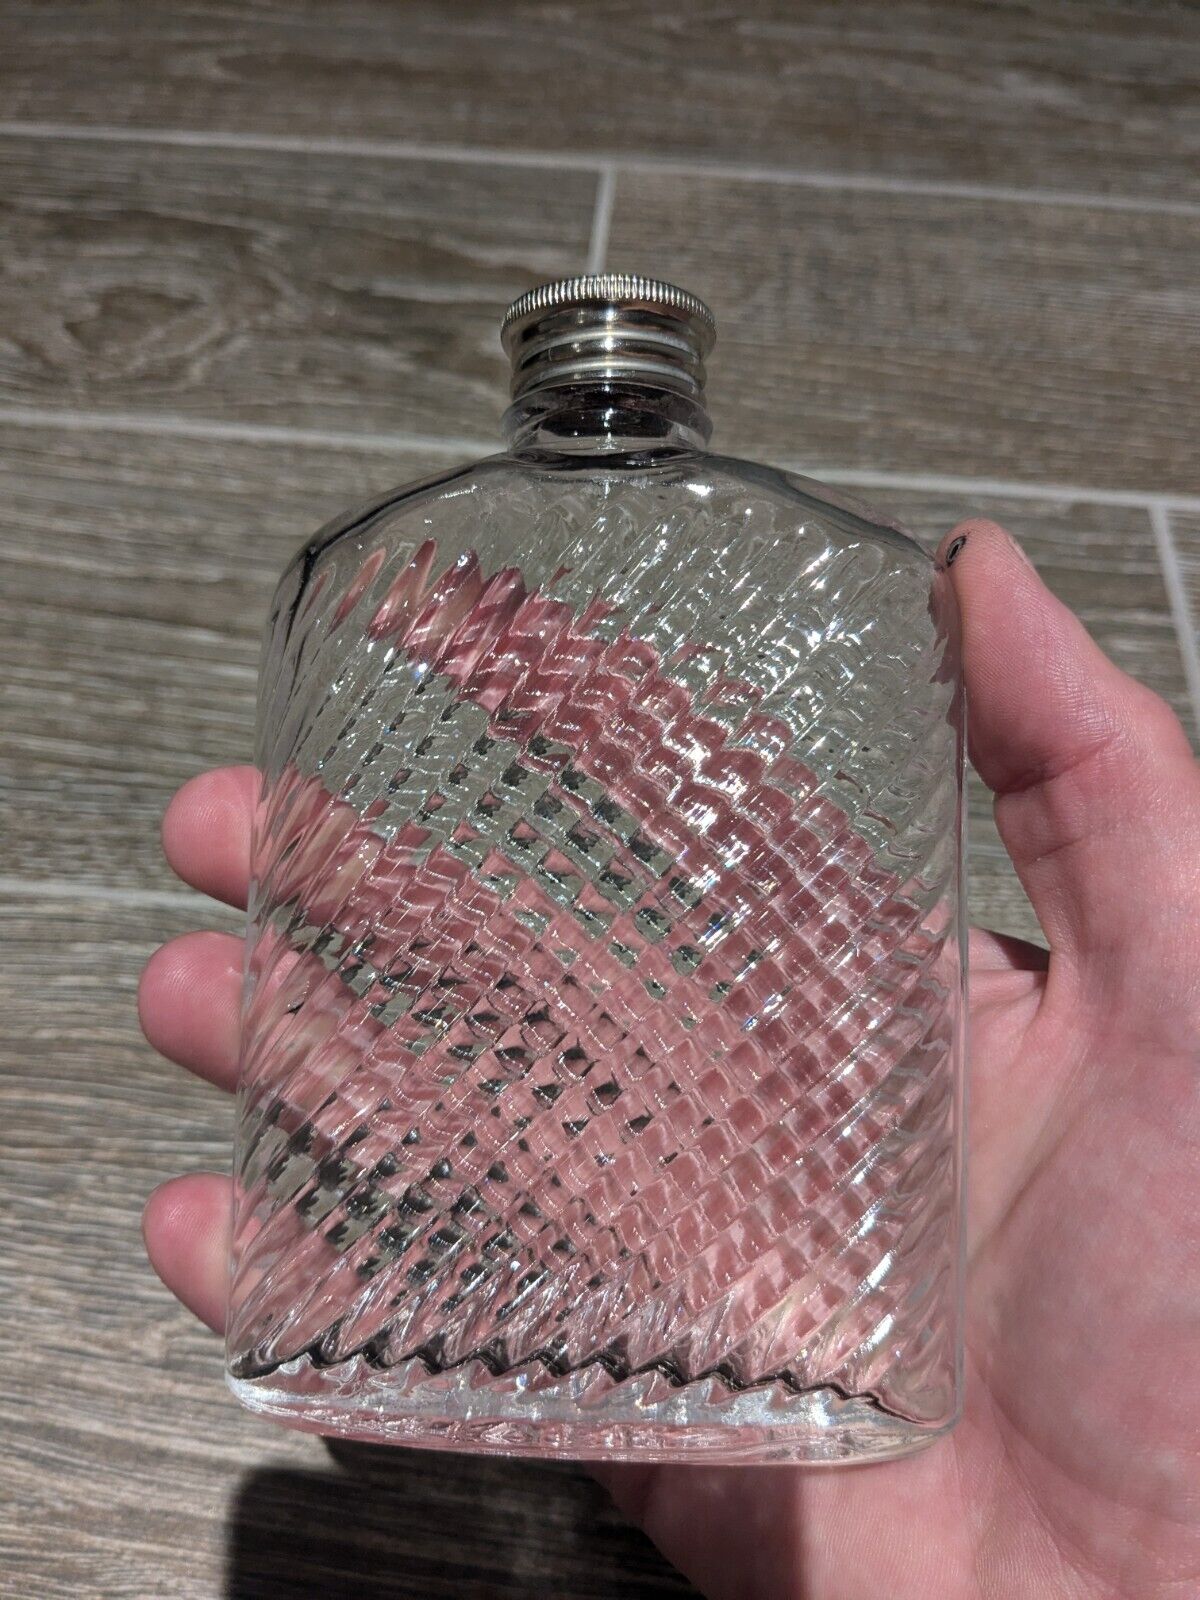 Vintage Universal Ribbed Curved Glass Hip Flask Pat'd Feb 8, 1927 Screw Top 